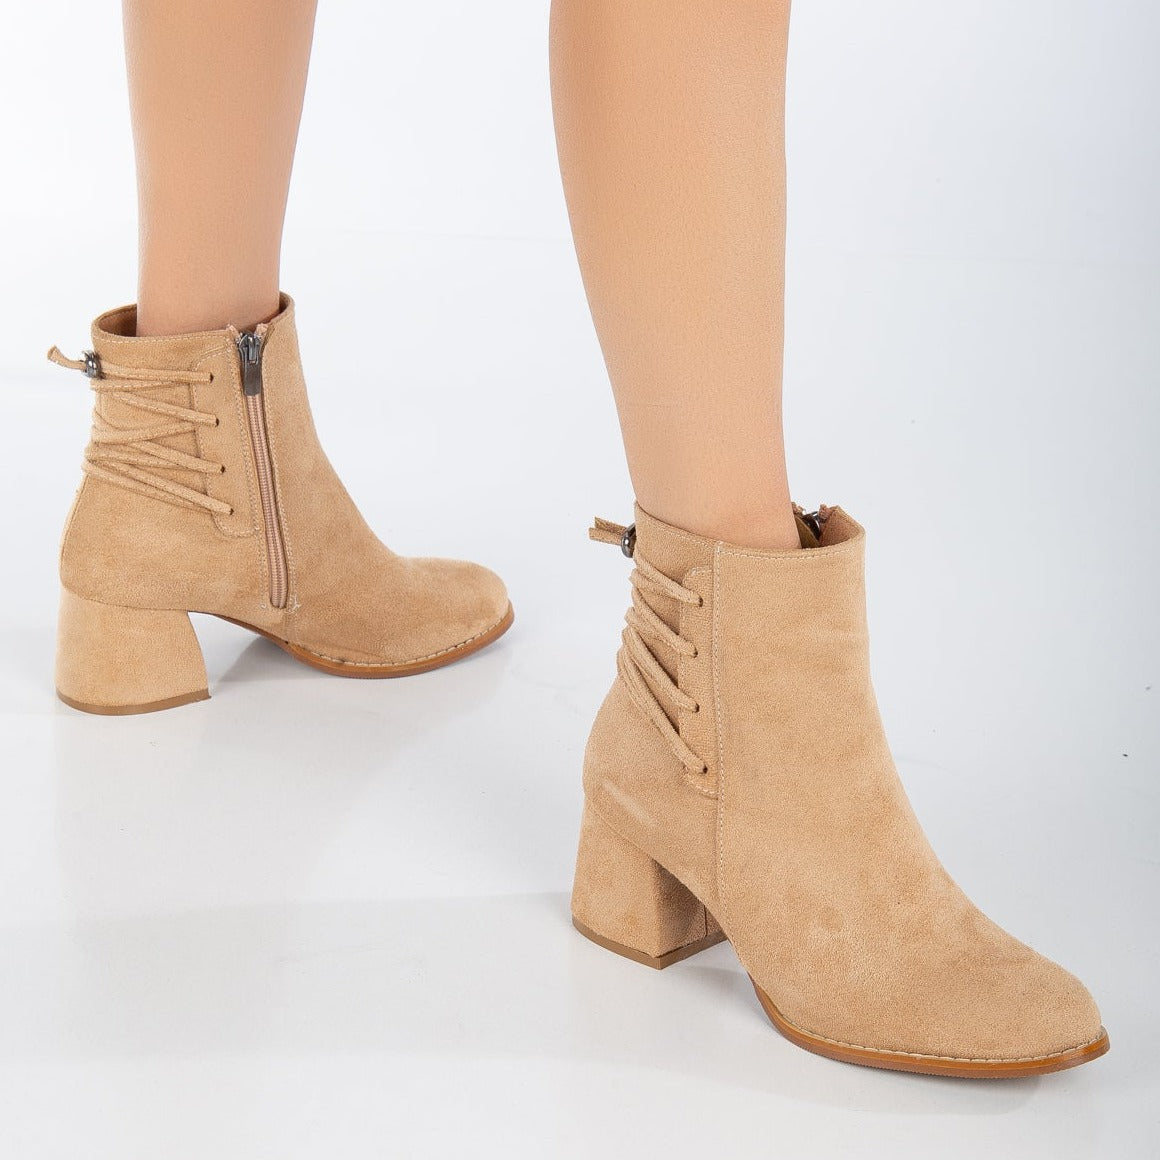 Lucie - Yellow Mustard Suede Ankle Boots